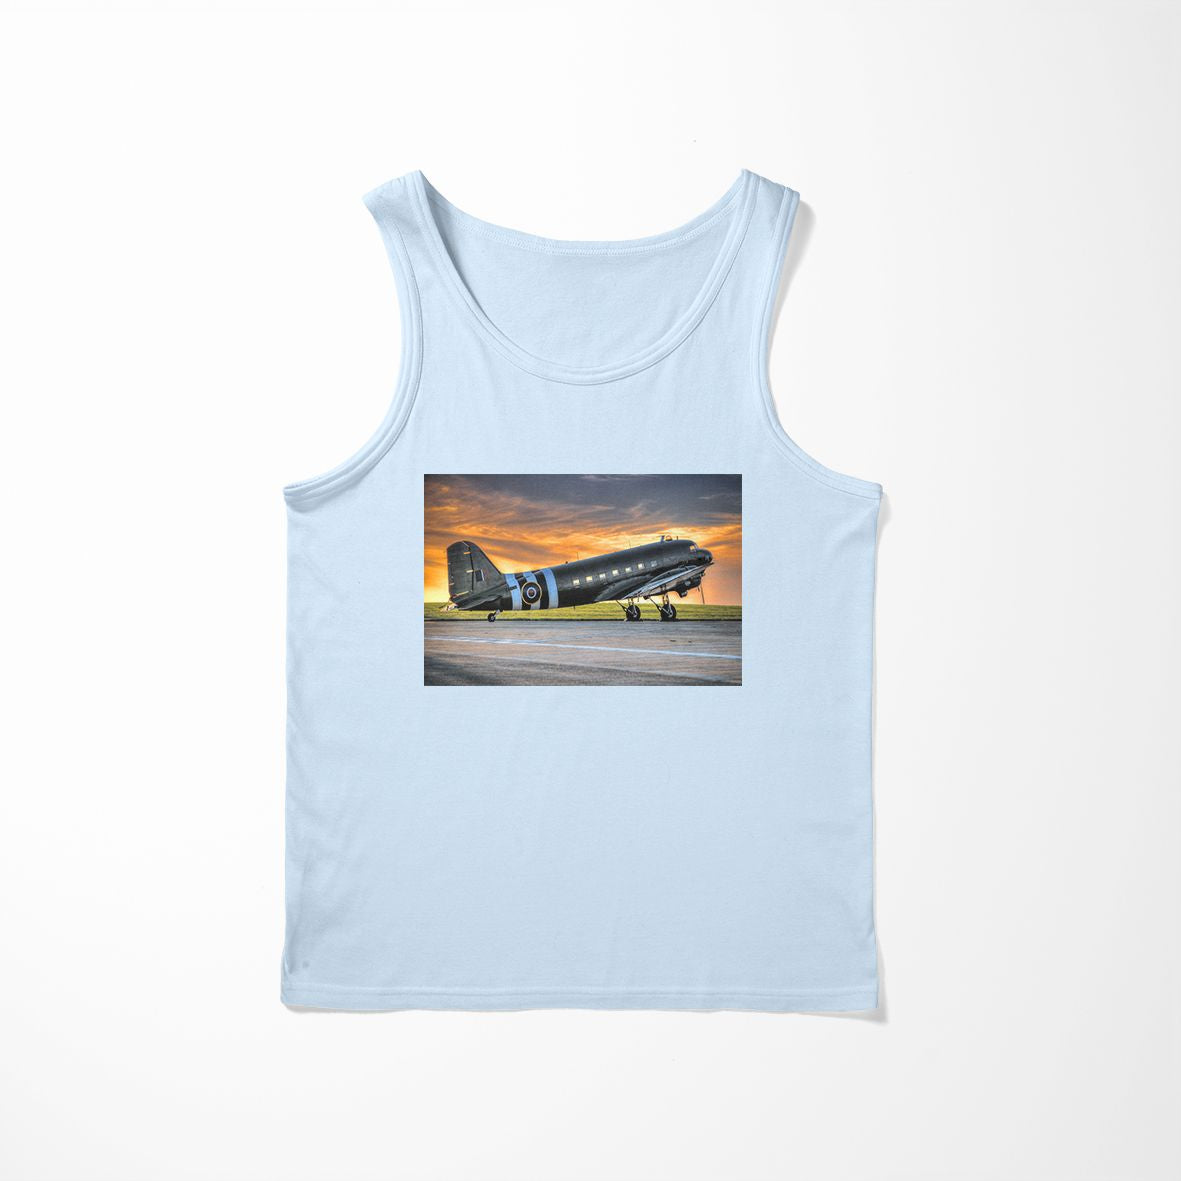 Old Airplane Parked During Sunset Designed Tank Tops